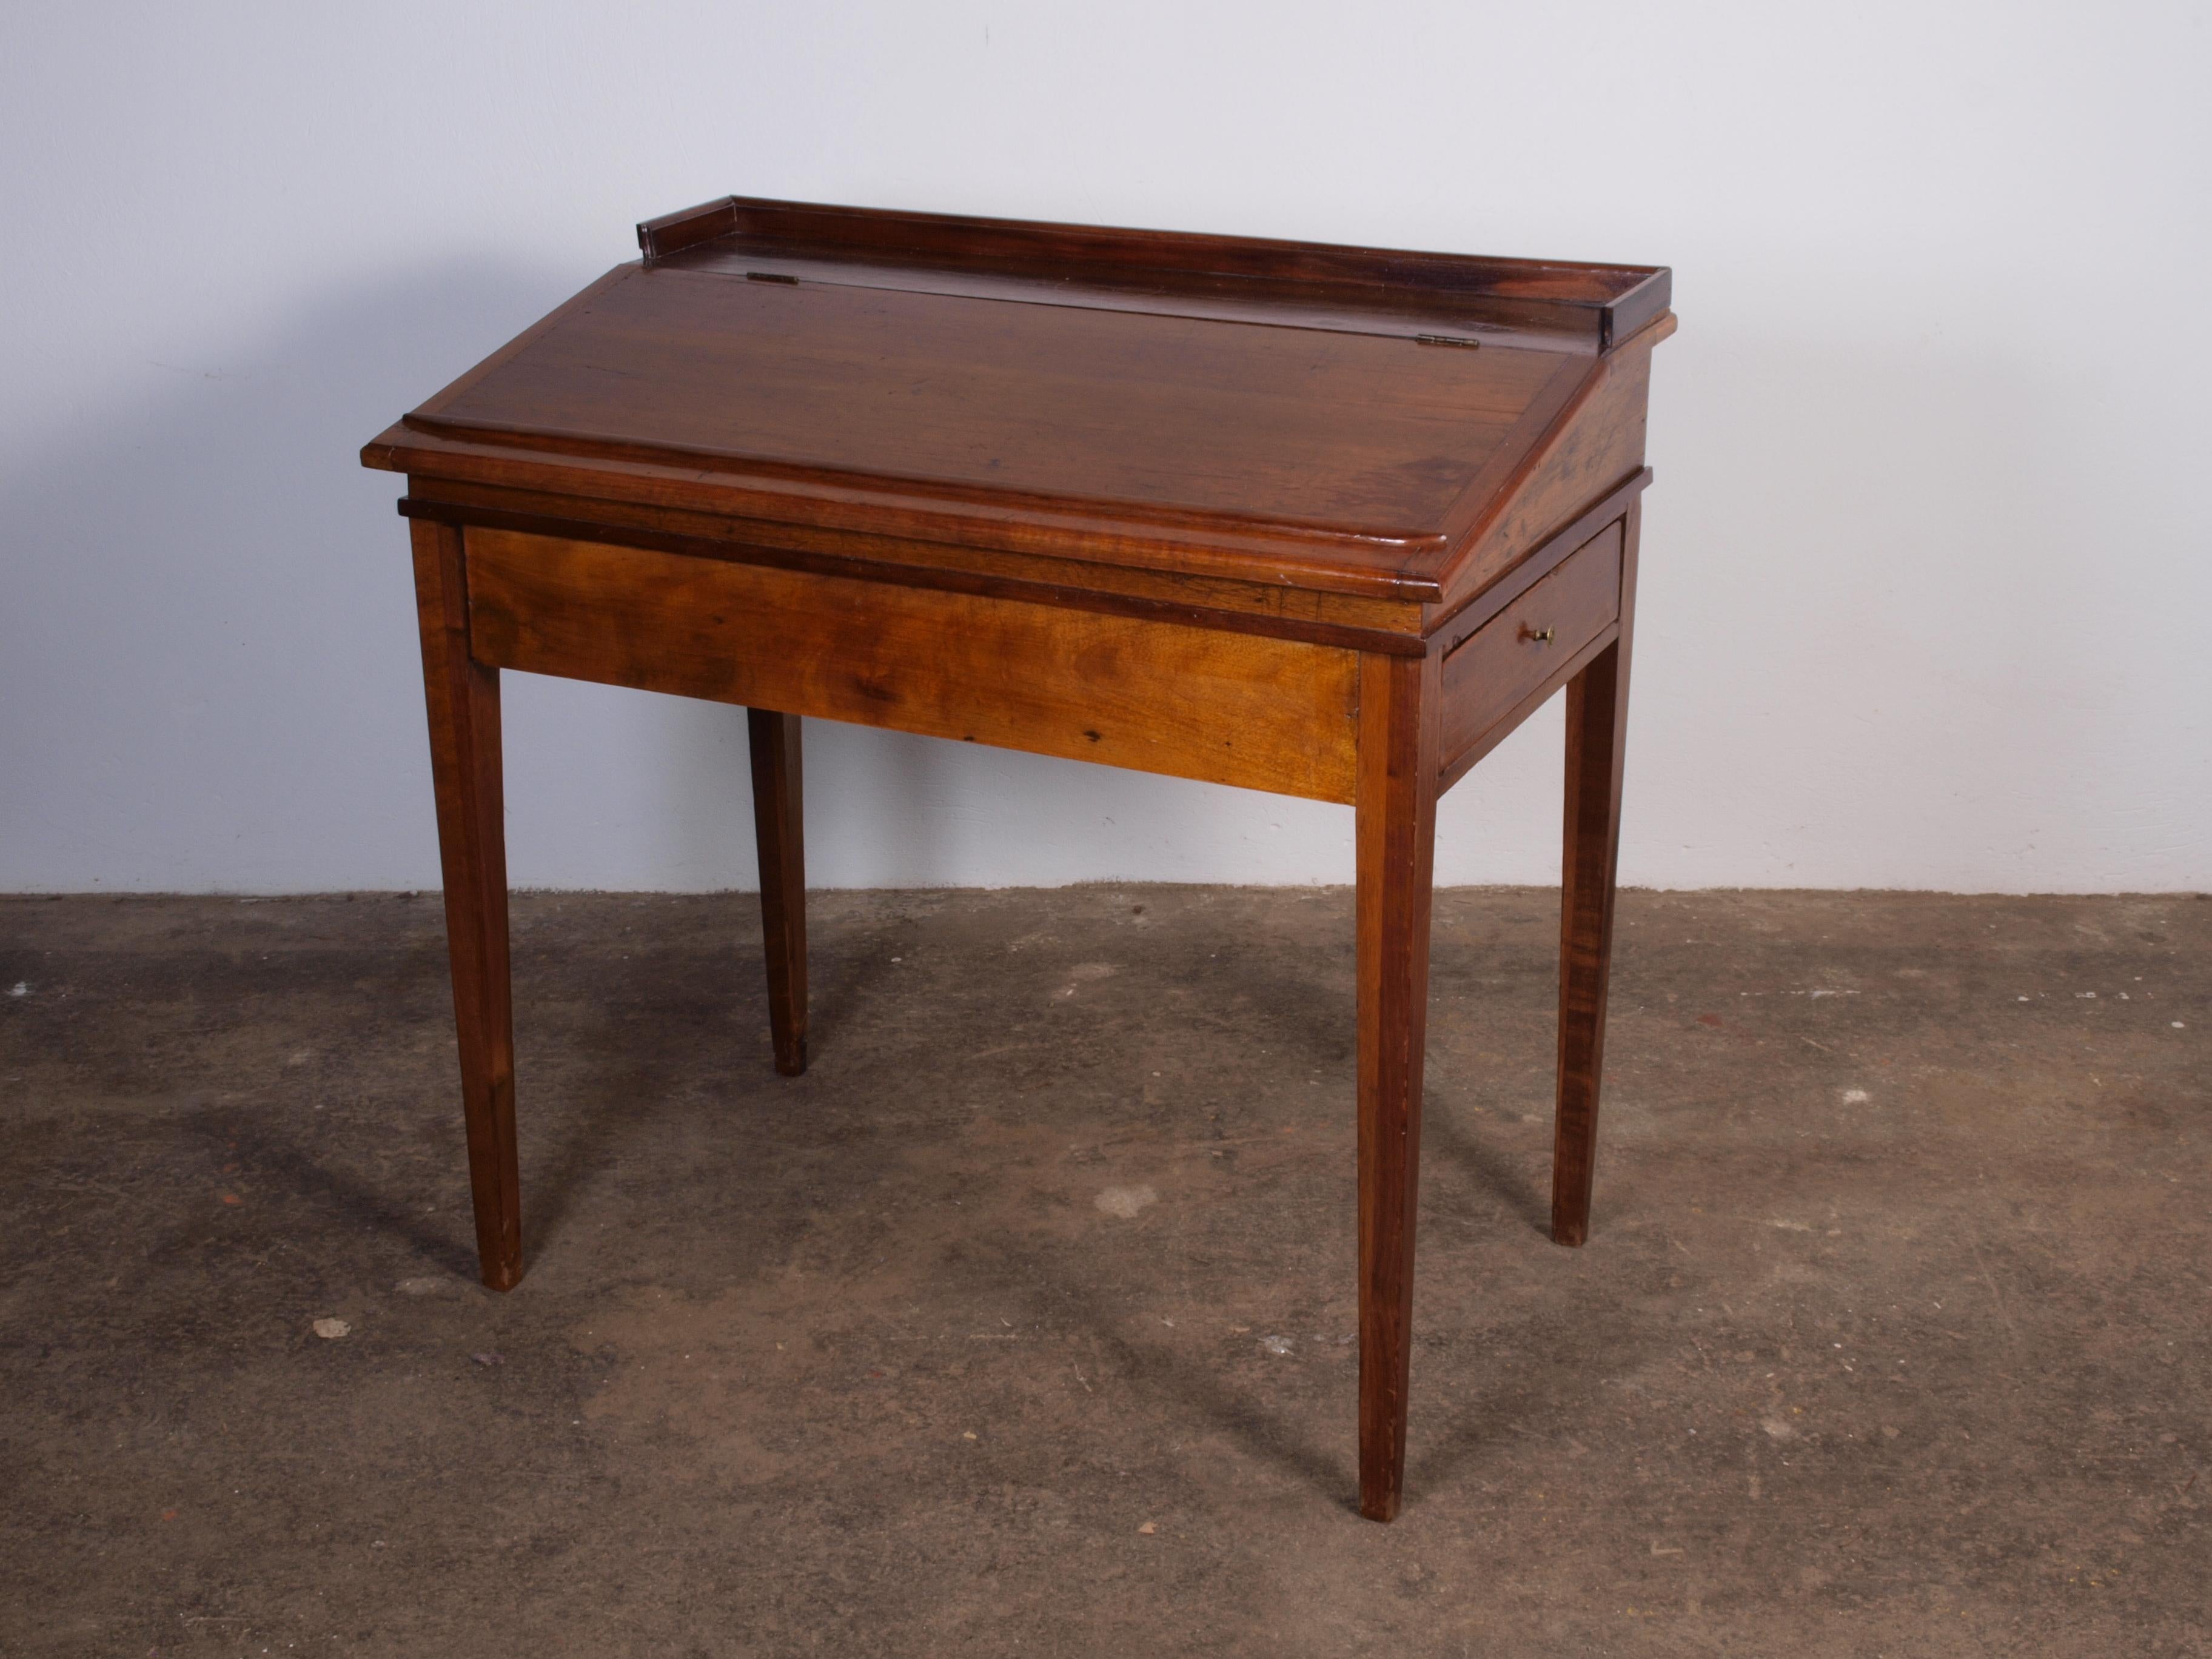 Antique Danish slant top desk, circa 1890s. Made for a rural schoolmaster, this pine desk retains its original character with minor mars and stains, protected by a smooth finish. Features ample storage compartments under the top. Danish design,